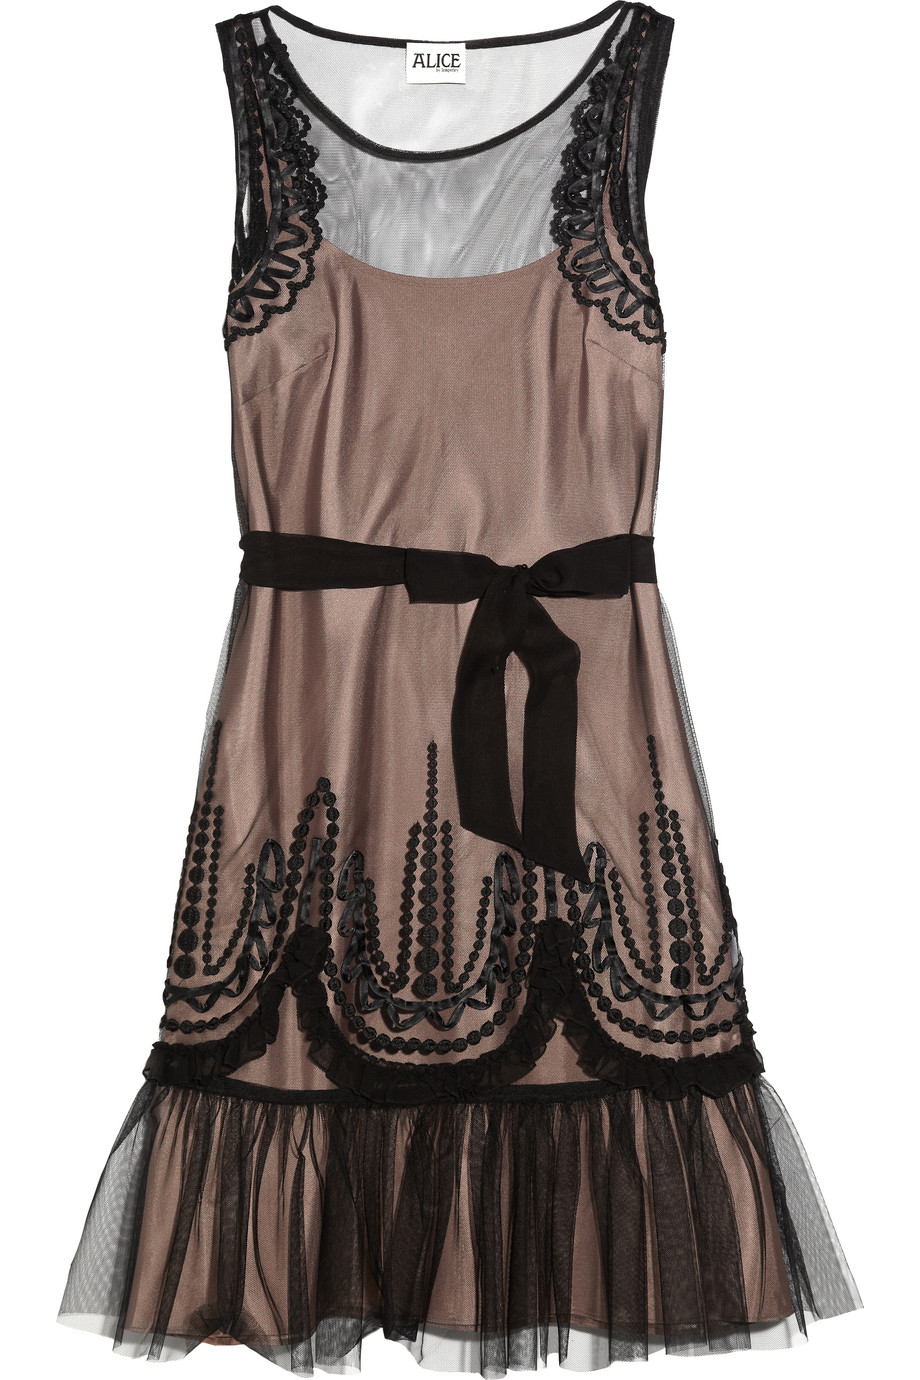 Lyst - Alice By Temperley Emerald Embroidered Tulle Dress in Brown